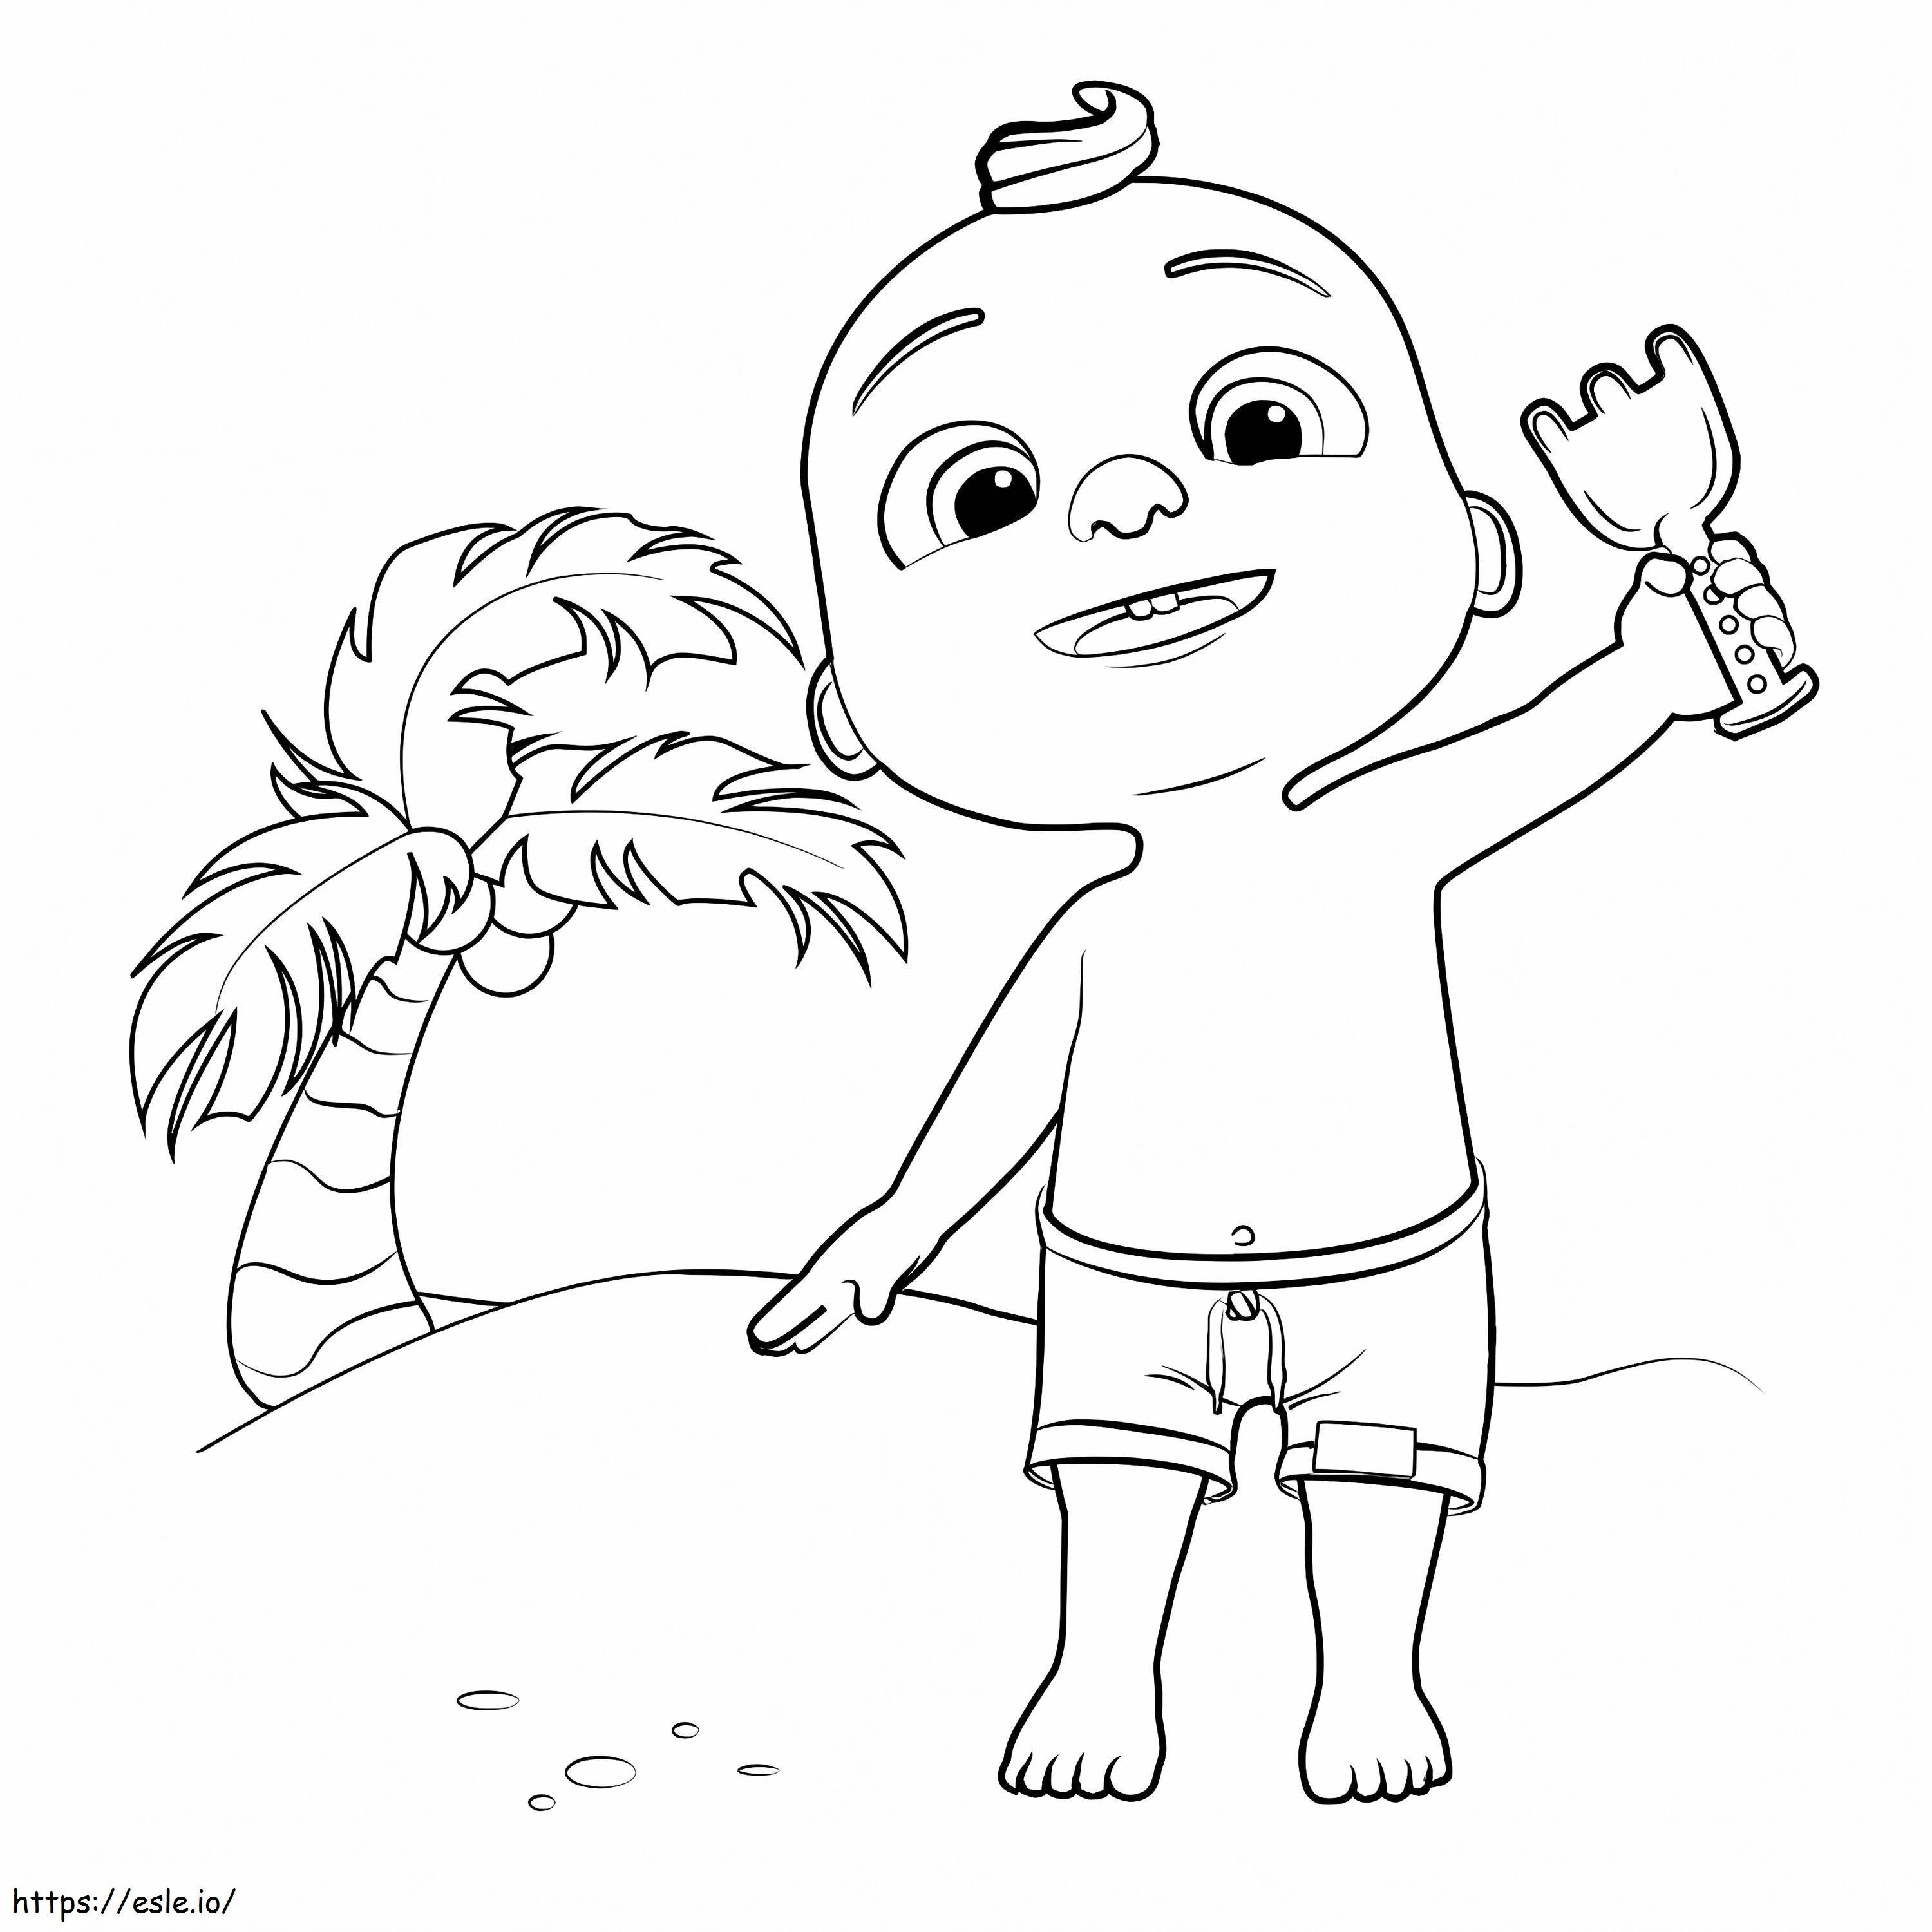 Little Johnny On The Beach coloring page